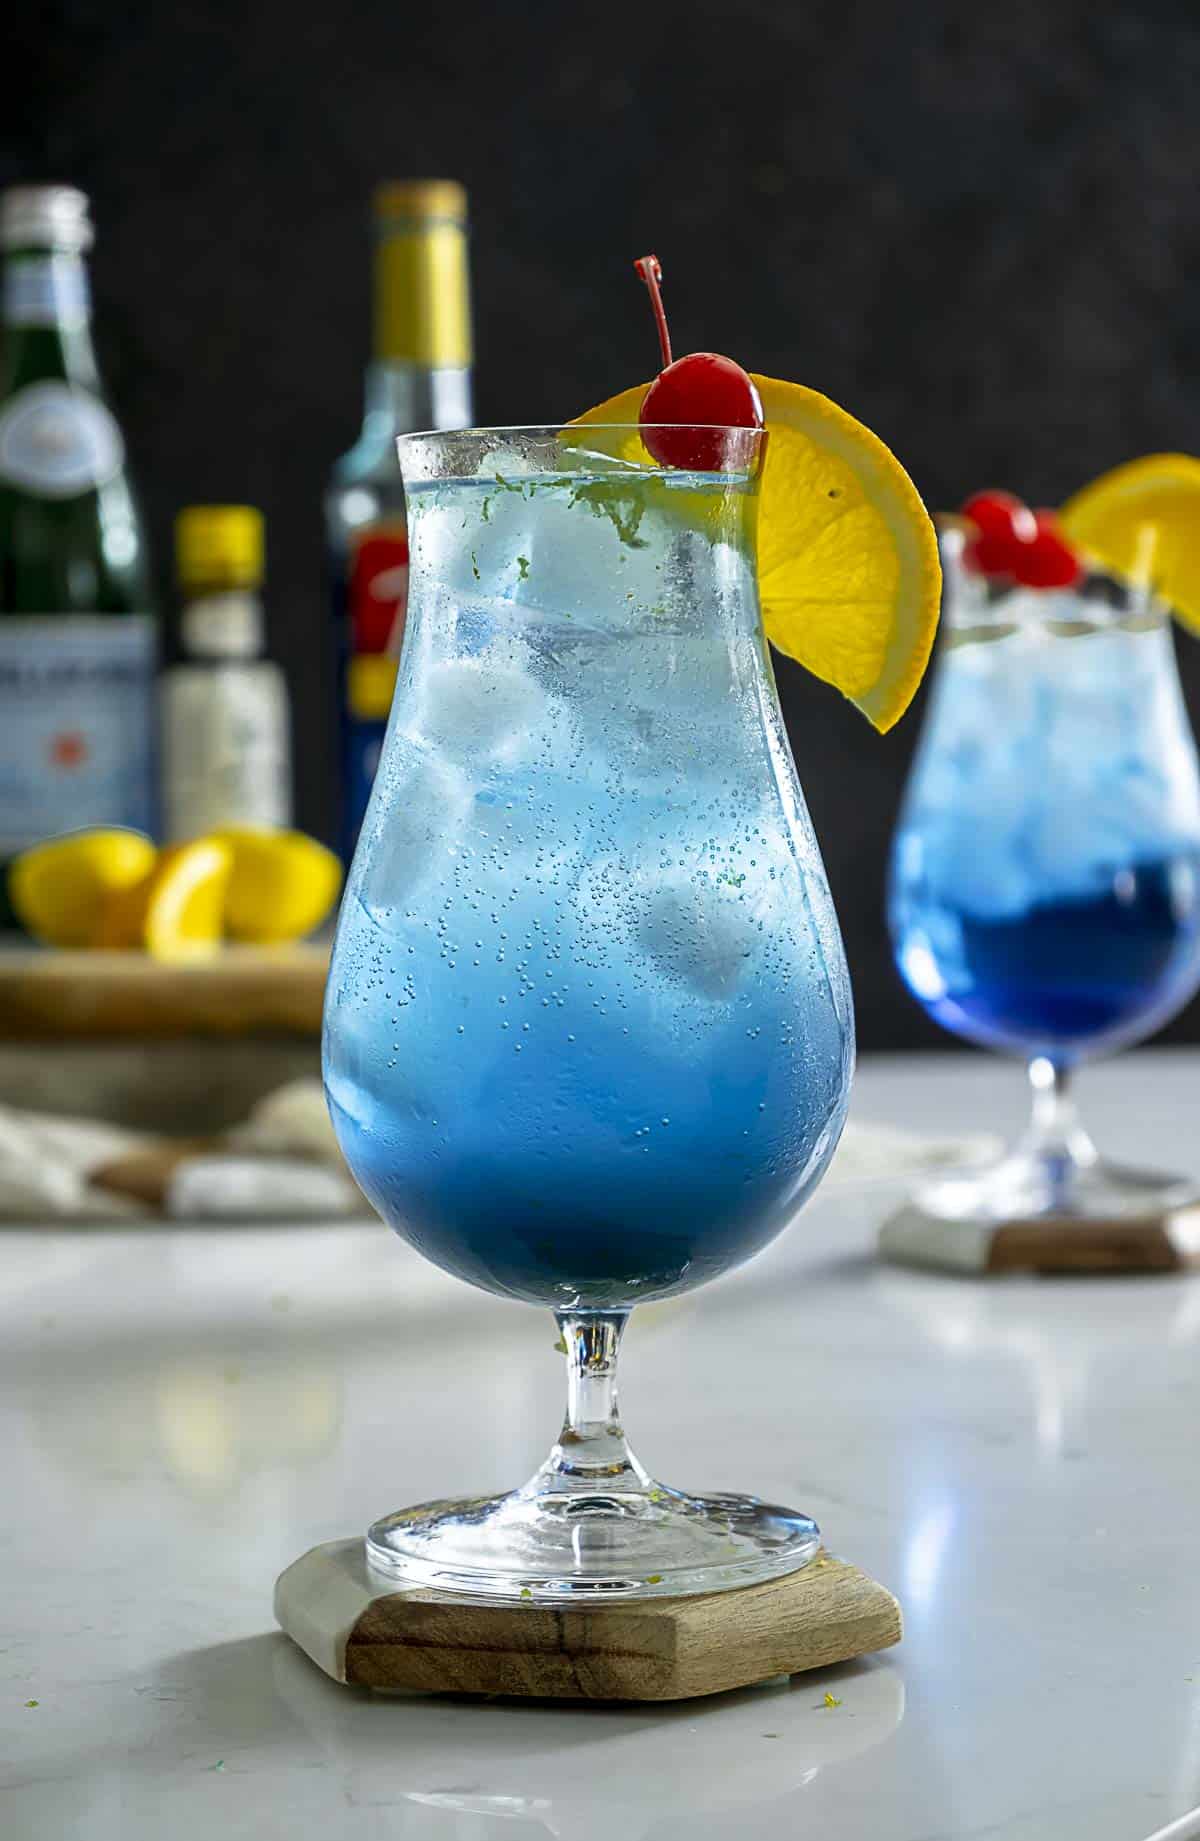 Blue lagoon drink without alcohol on table.